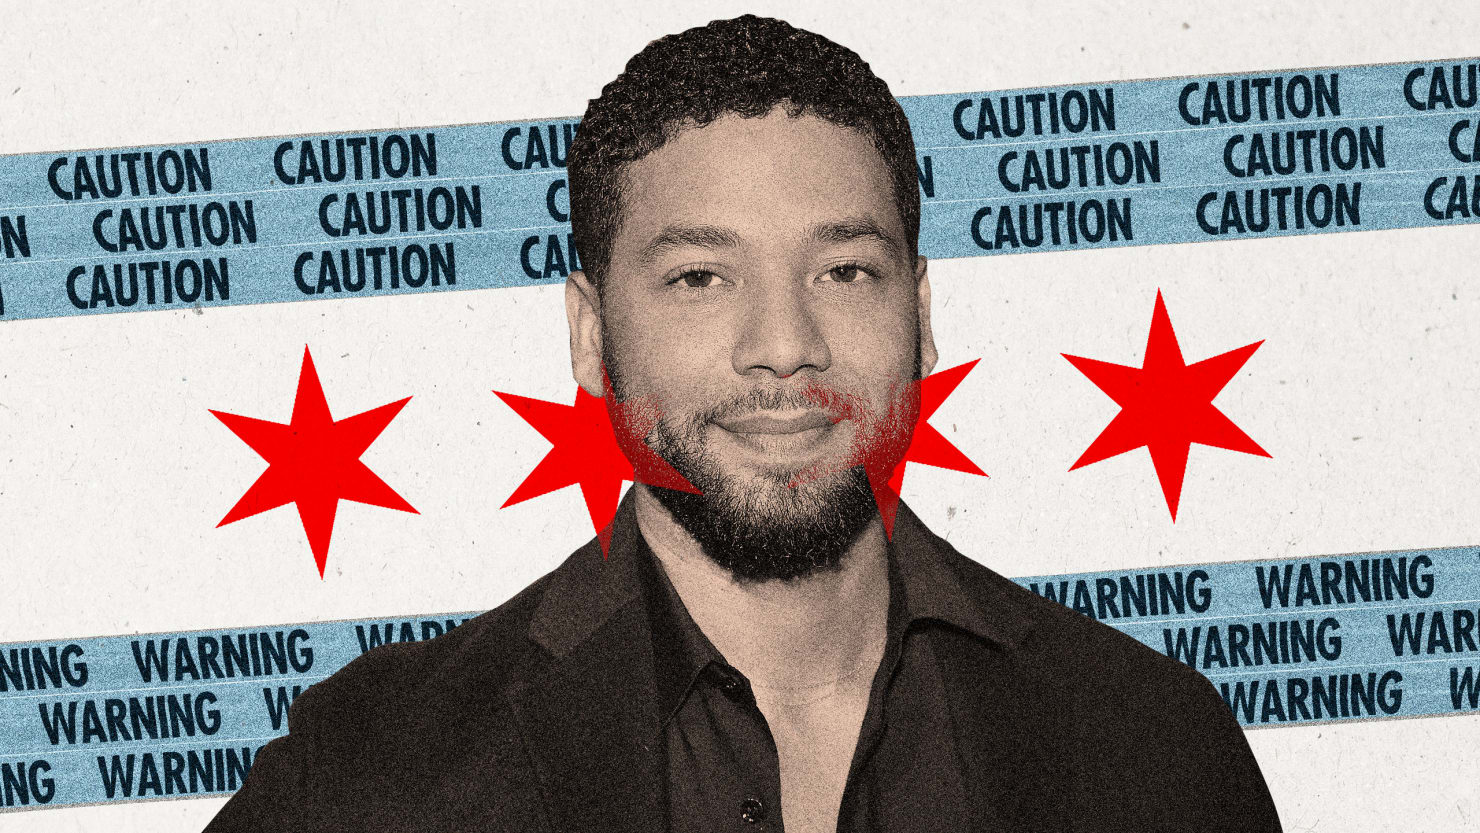 The Jussie Smollett Case and the Murder Chicago PD Could've Been Investigating Instead1480 x 833